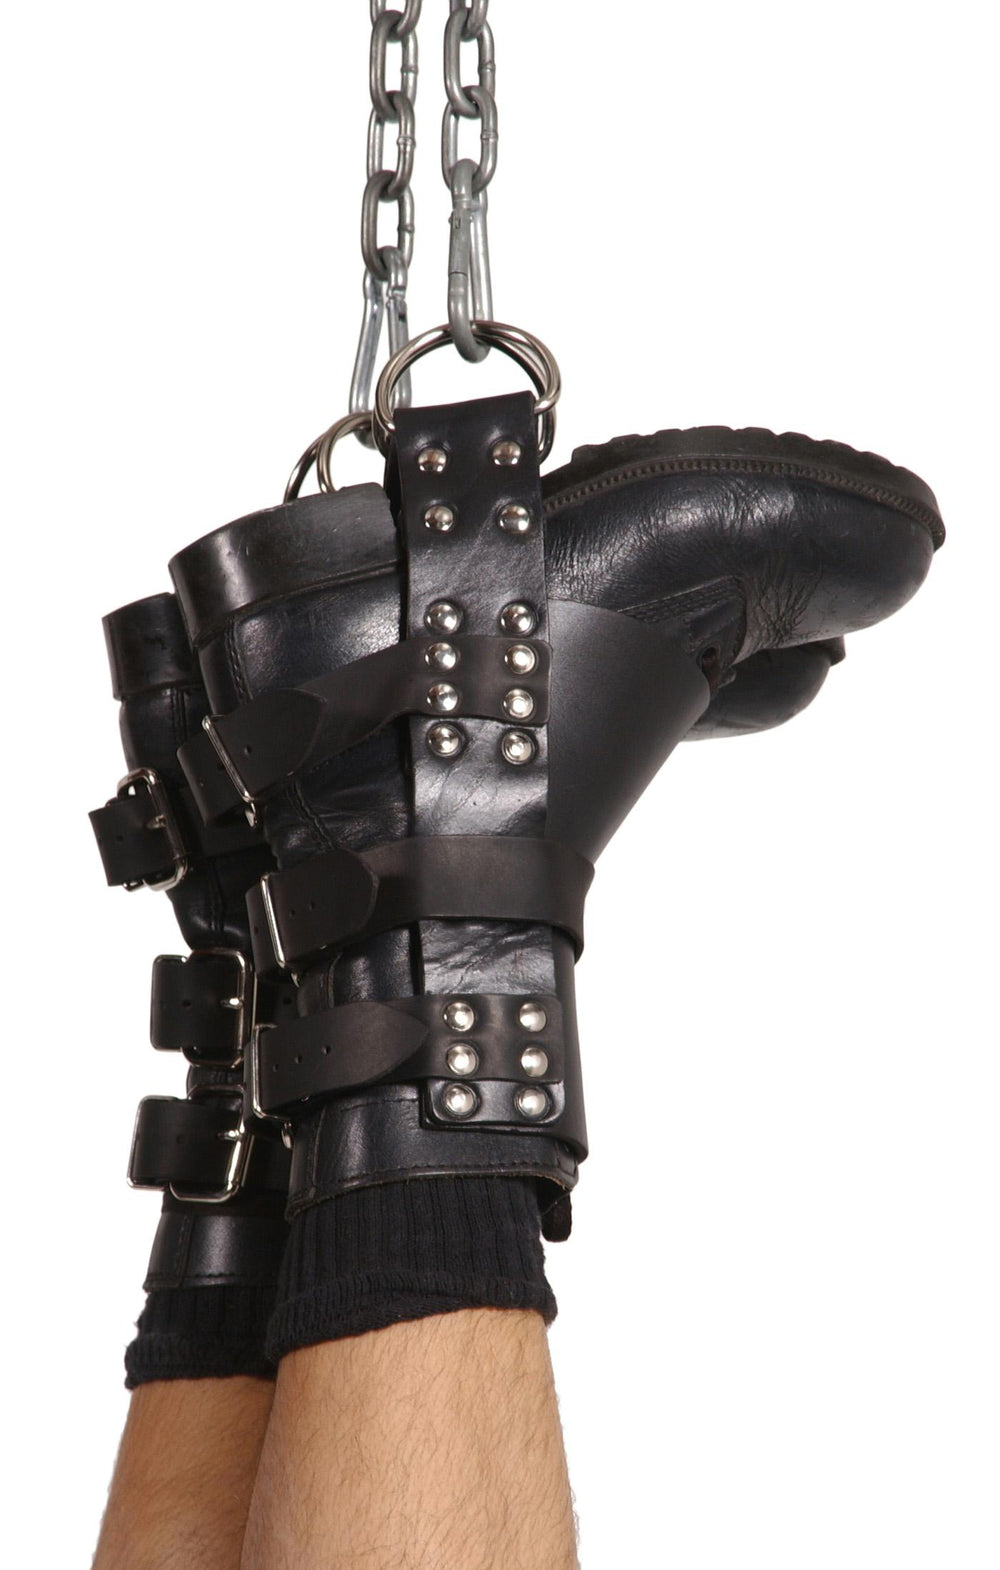 Boot Suspension Restraints - Fun and Kinky Sex Toys 